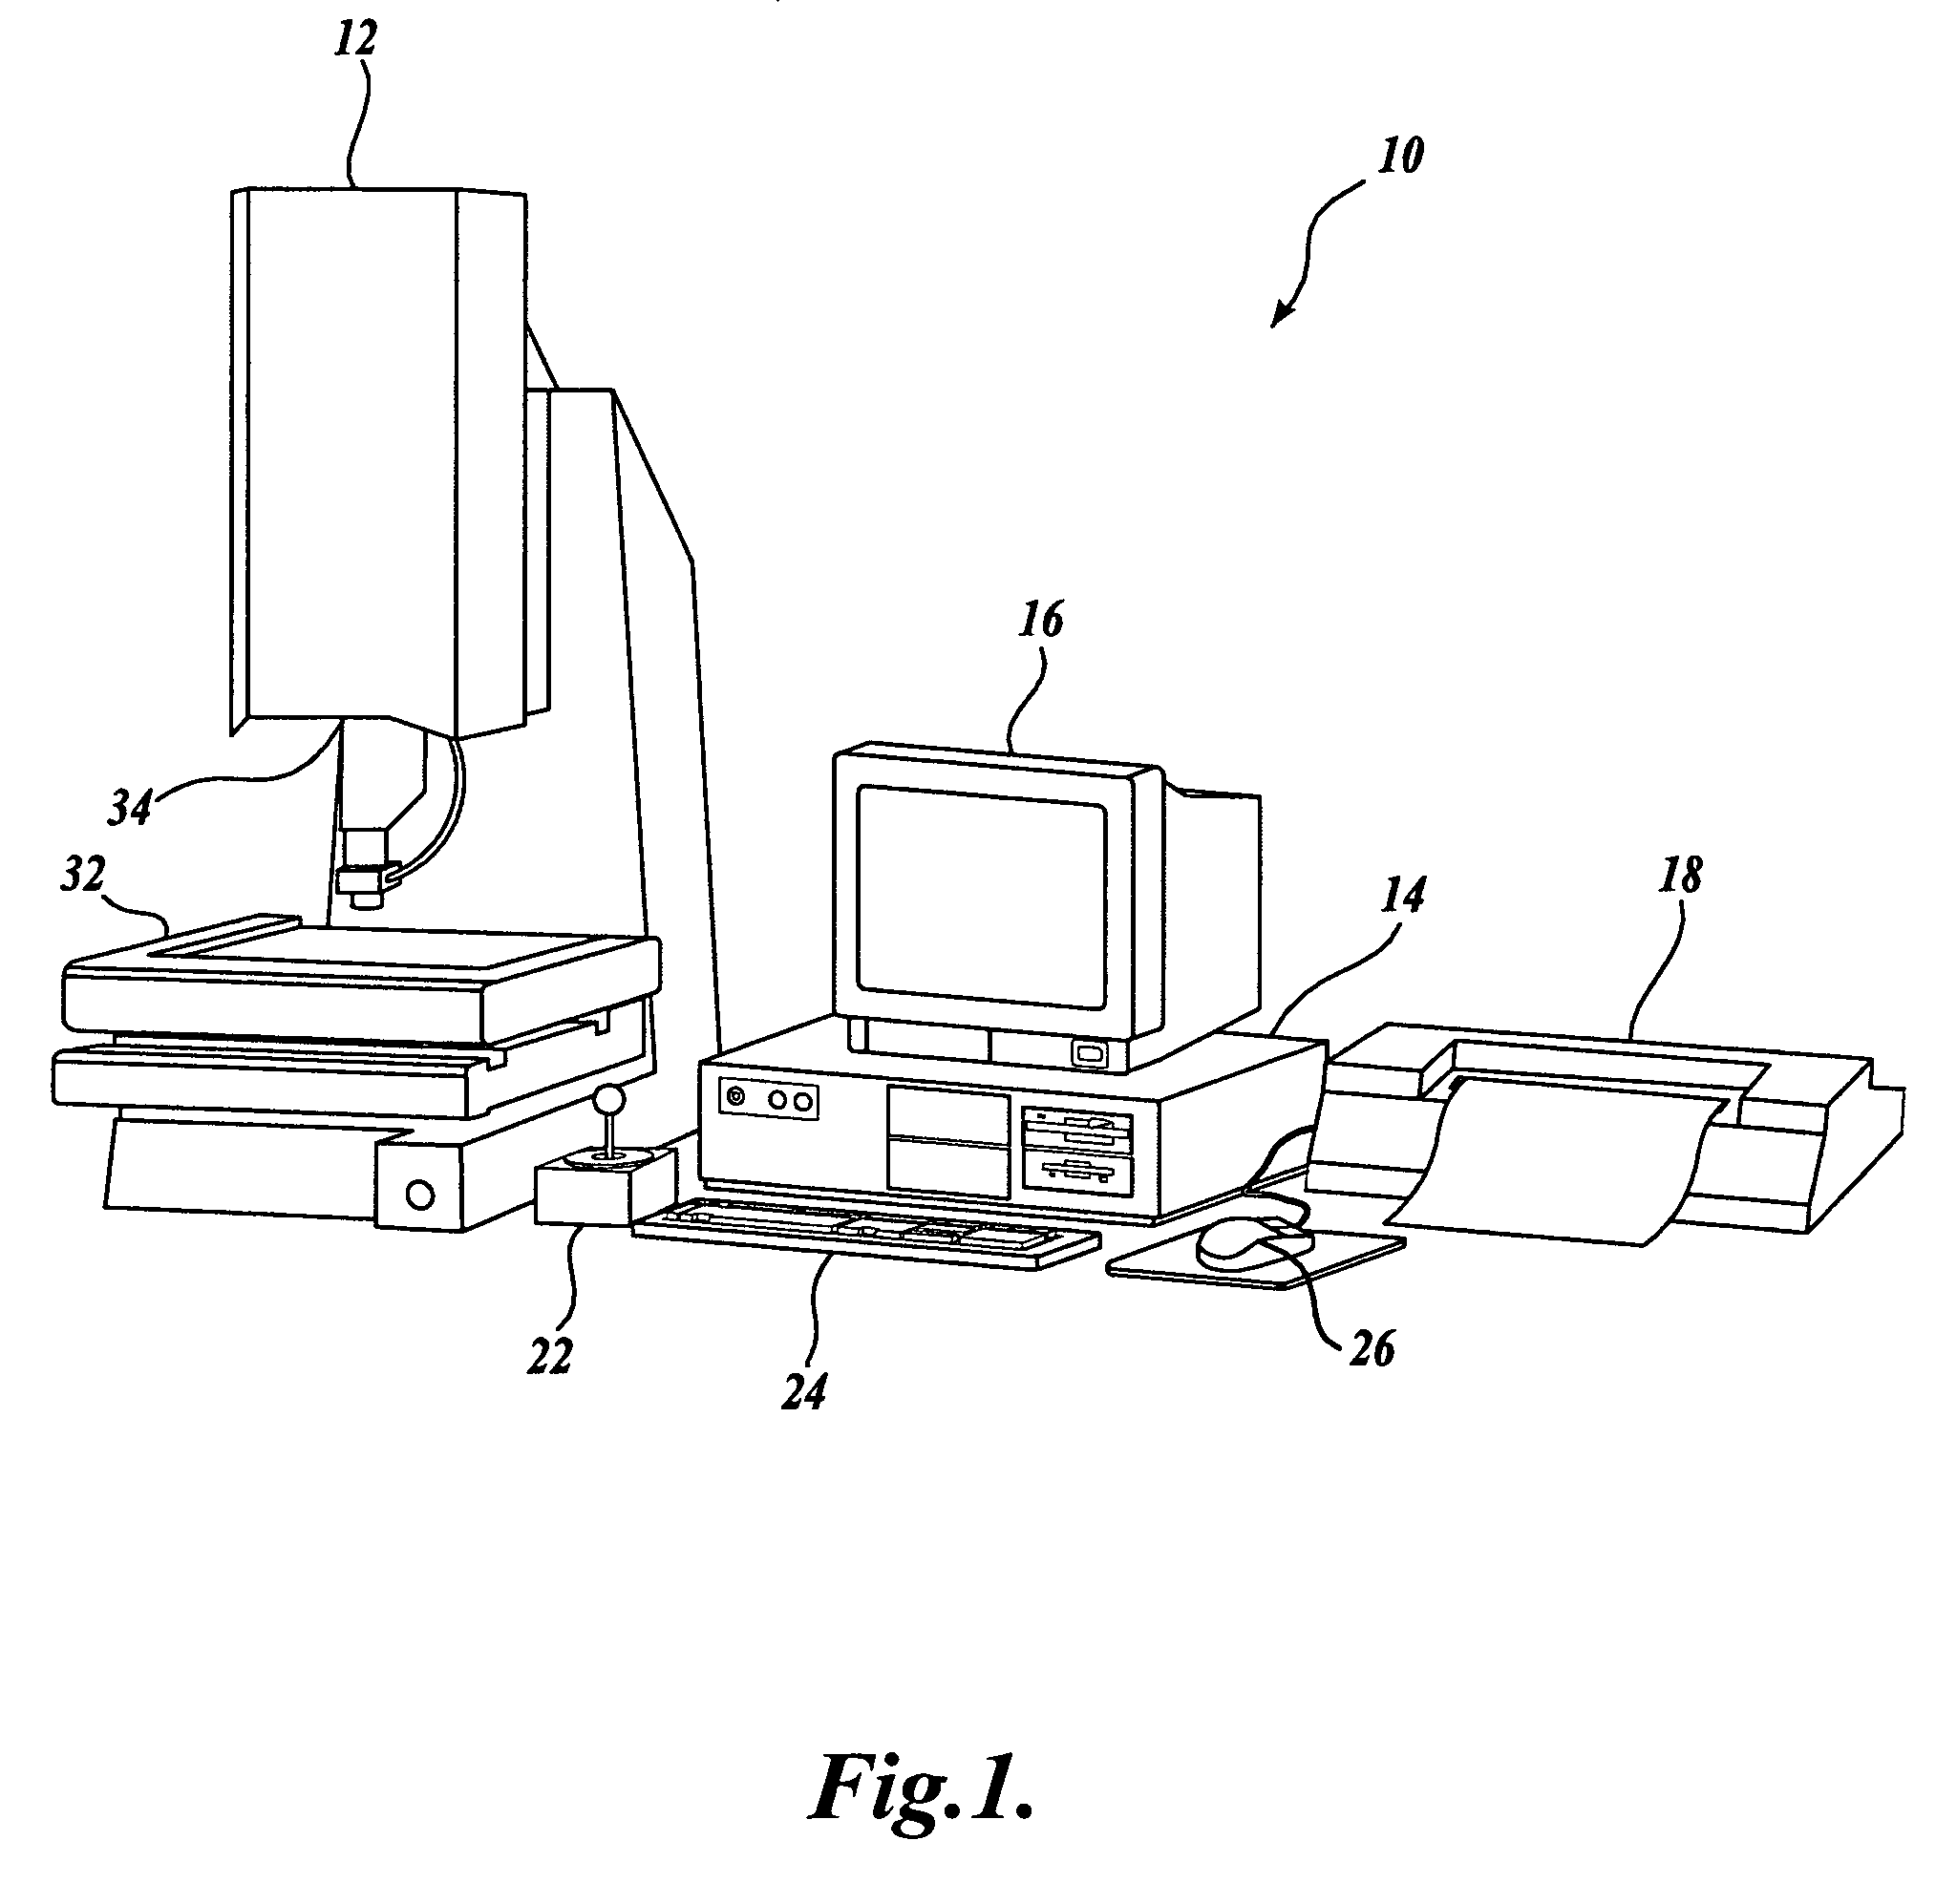 System and method for automatically recovering video tools in a vision system